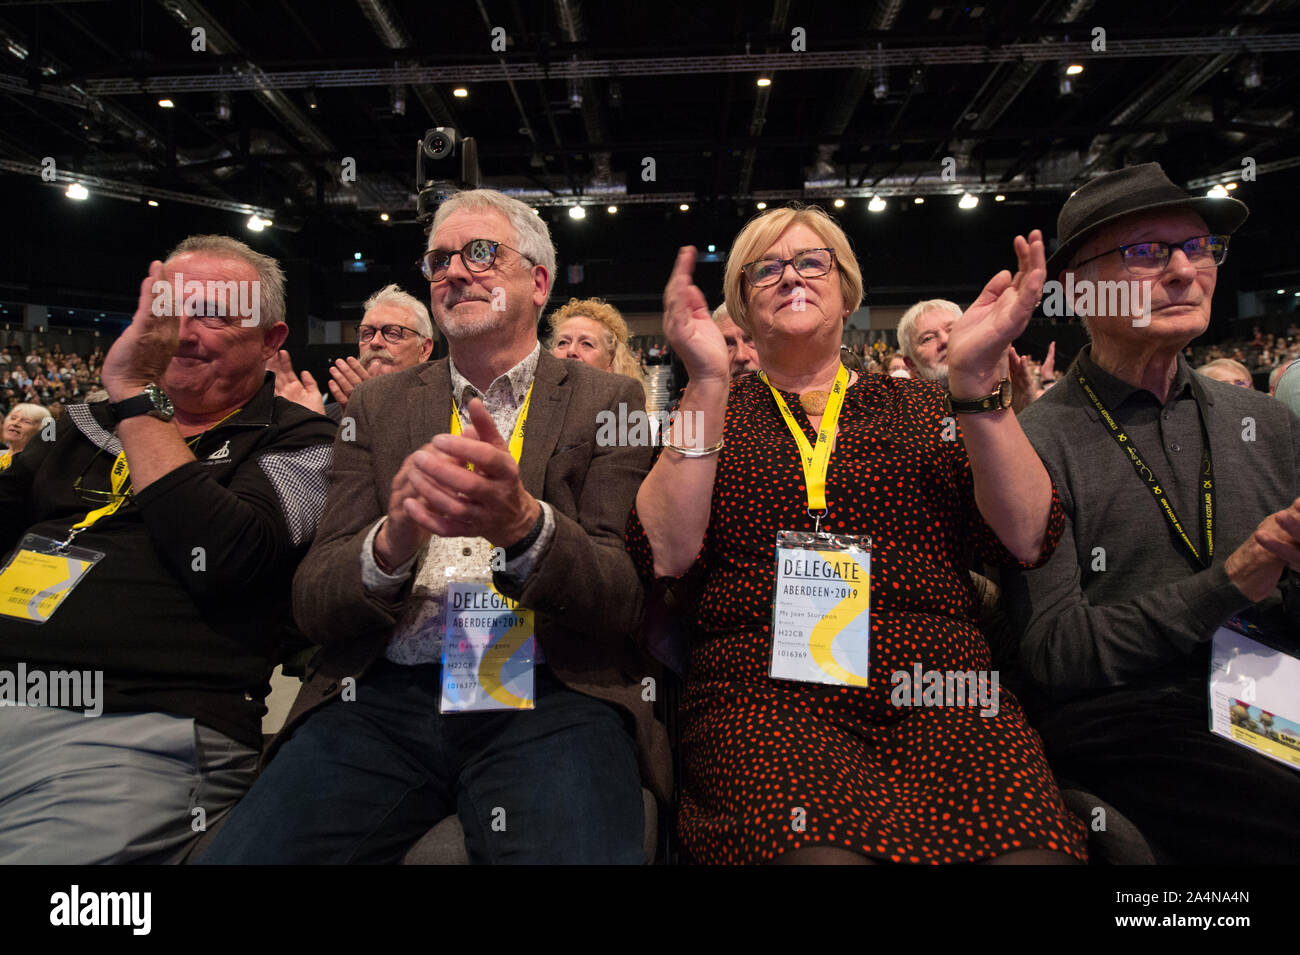 Aberdeen, UK. 15 October 2019.  Pictured:  (left of centre) Robin Sturgeon, and , (right of centre) Joan Sturgeon. Nicola Sturgeon - First Minister of Scotland and Leader of the Scottish National Party (SNP) delivers her keynote speech on getting Scottish Independence to close the Scottish National Party Conference, Aberdeen, The Event Complex Aberdeen (TECA). Credit: Colin Fisher/Alamy Live News Stock Photo